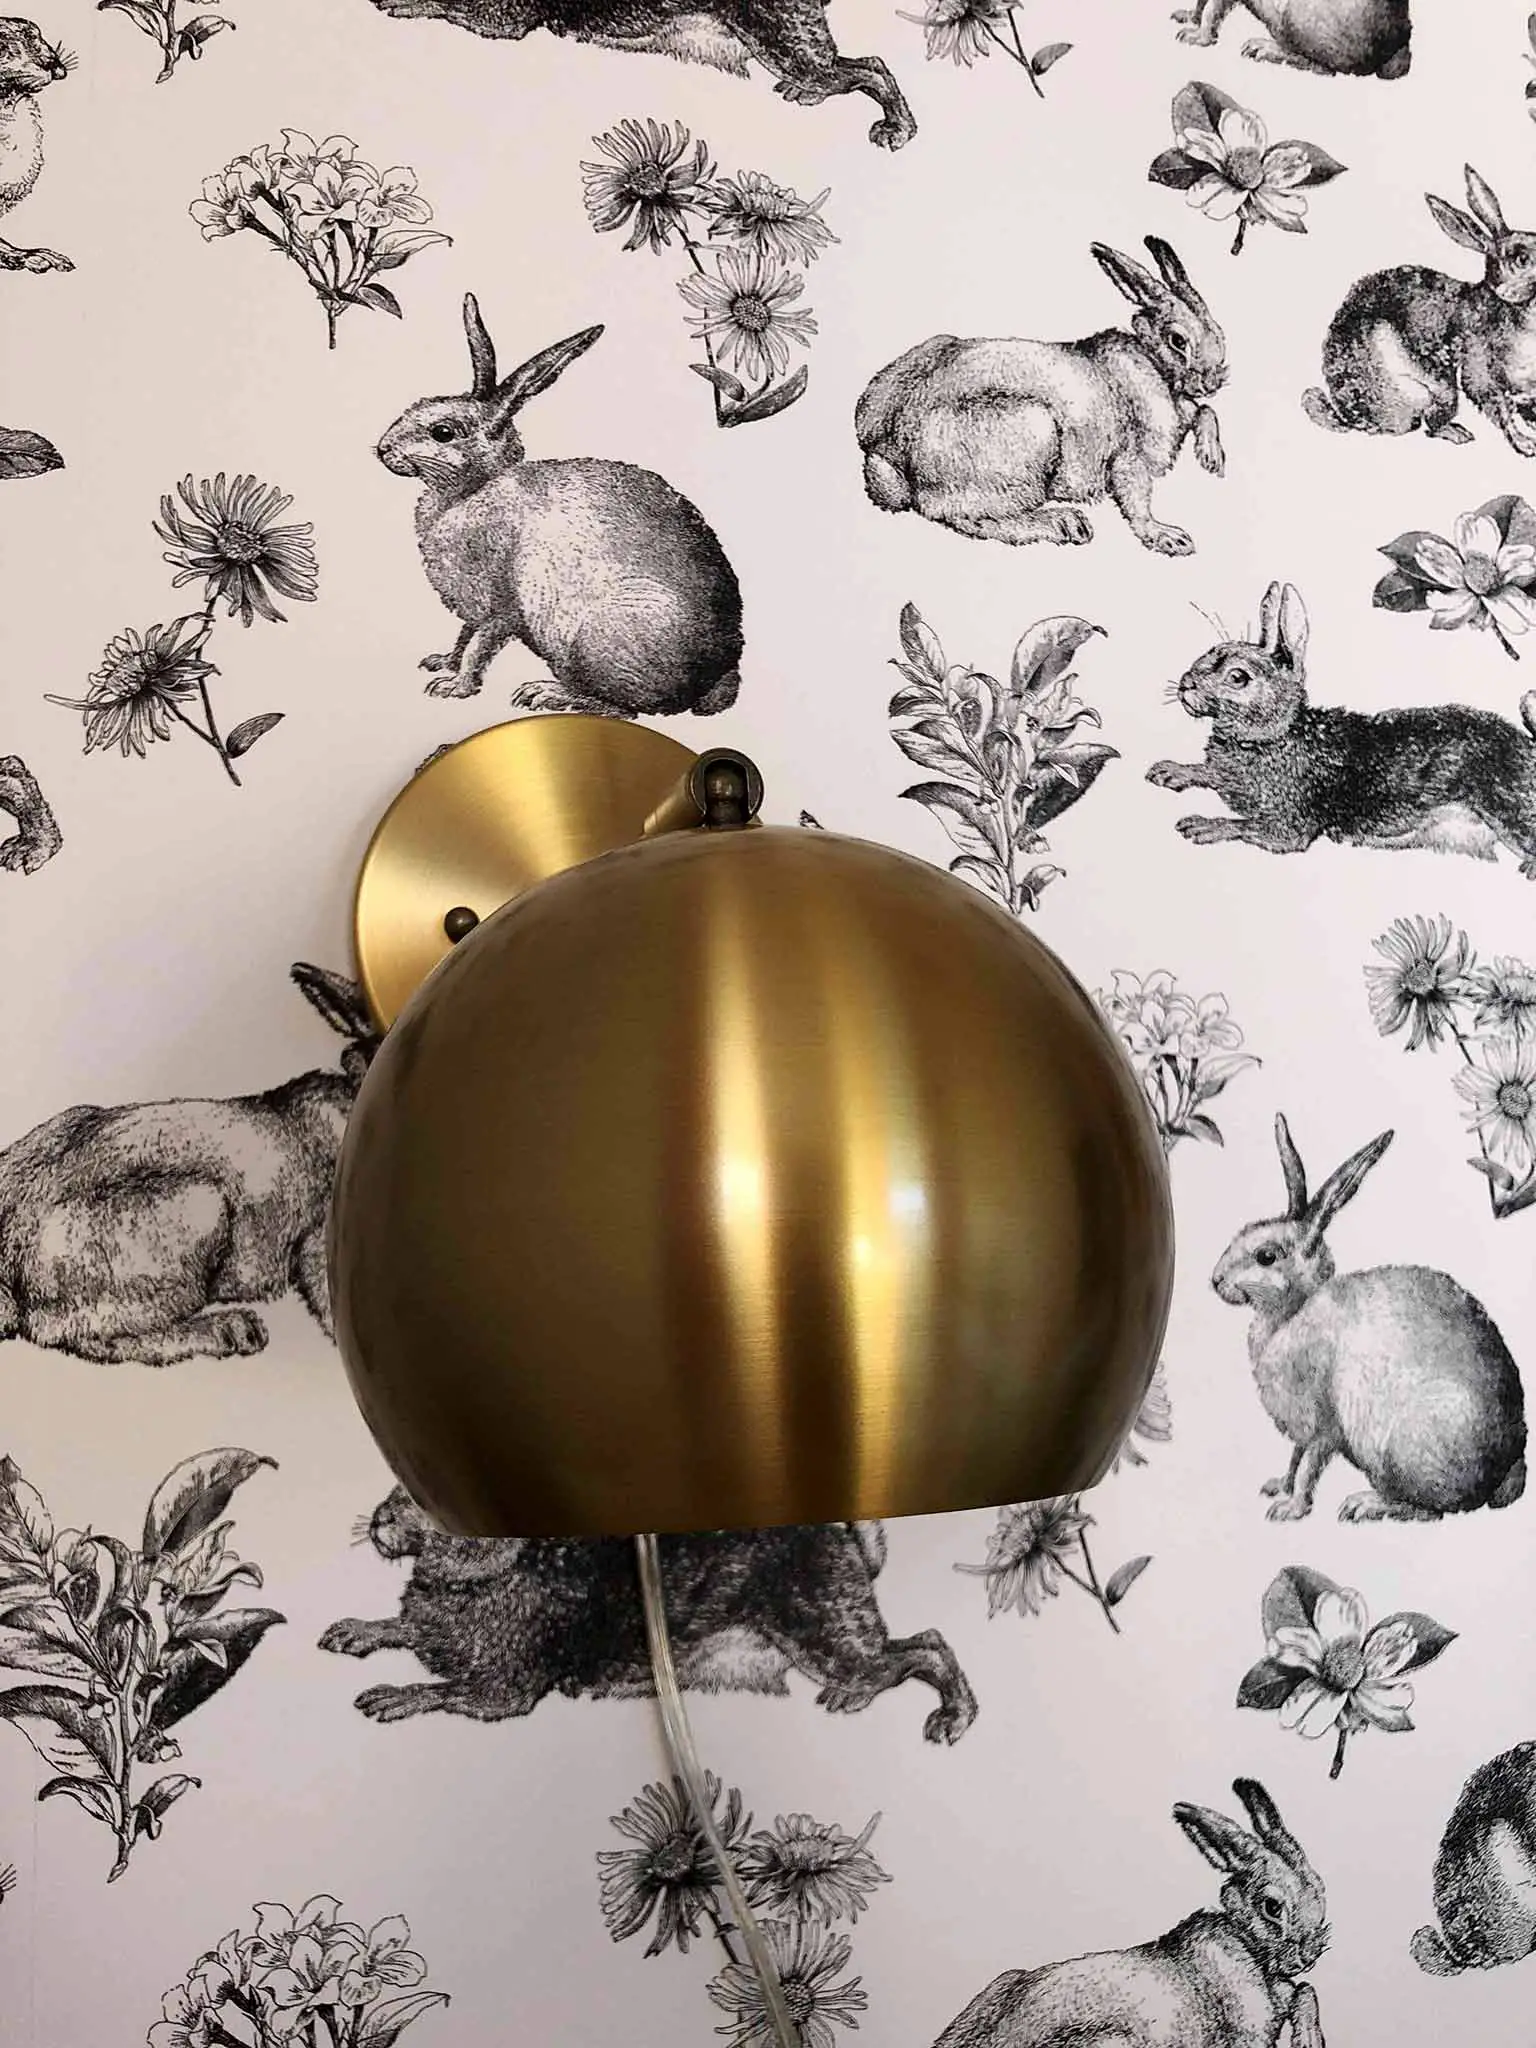 Gold wall lamps and rabbit wallpaper - Guest Participant of the One Room Challenge - That Homebird Life Blog